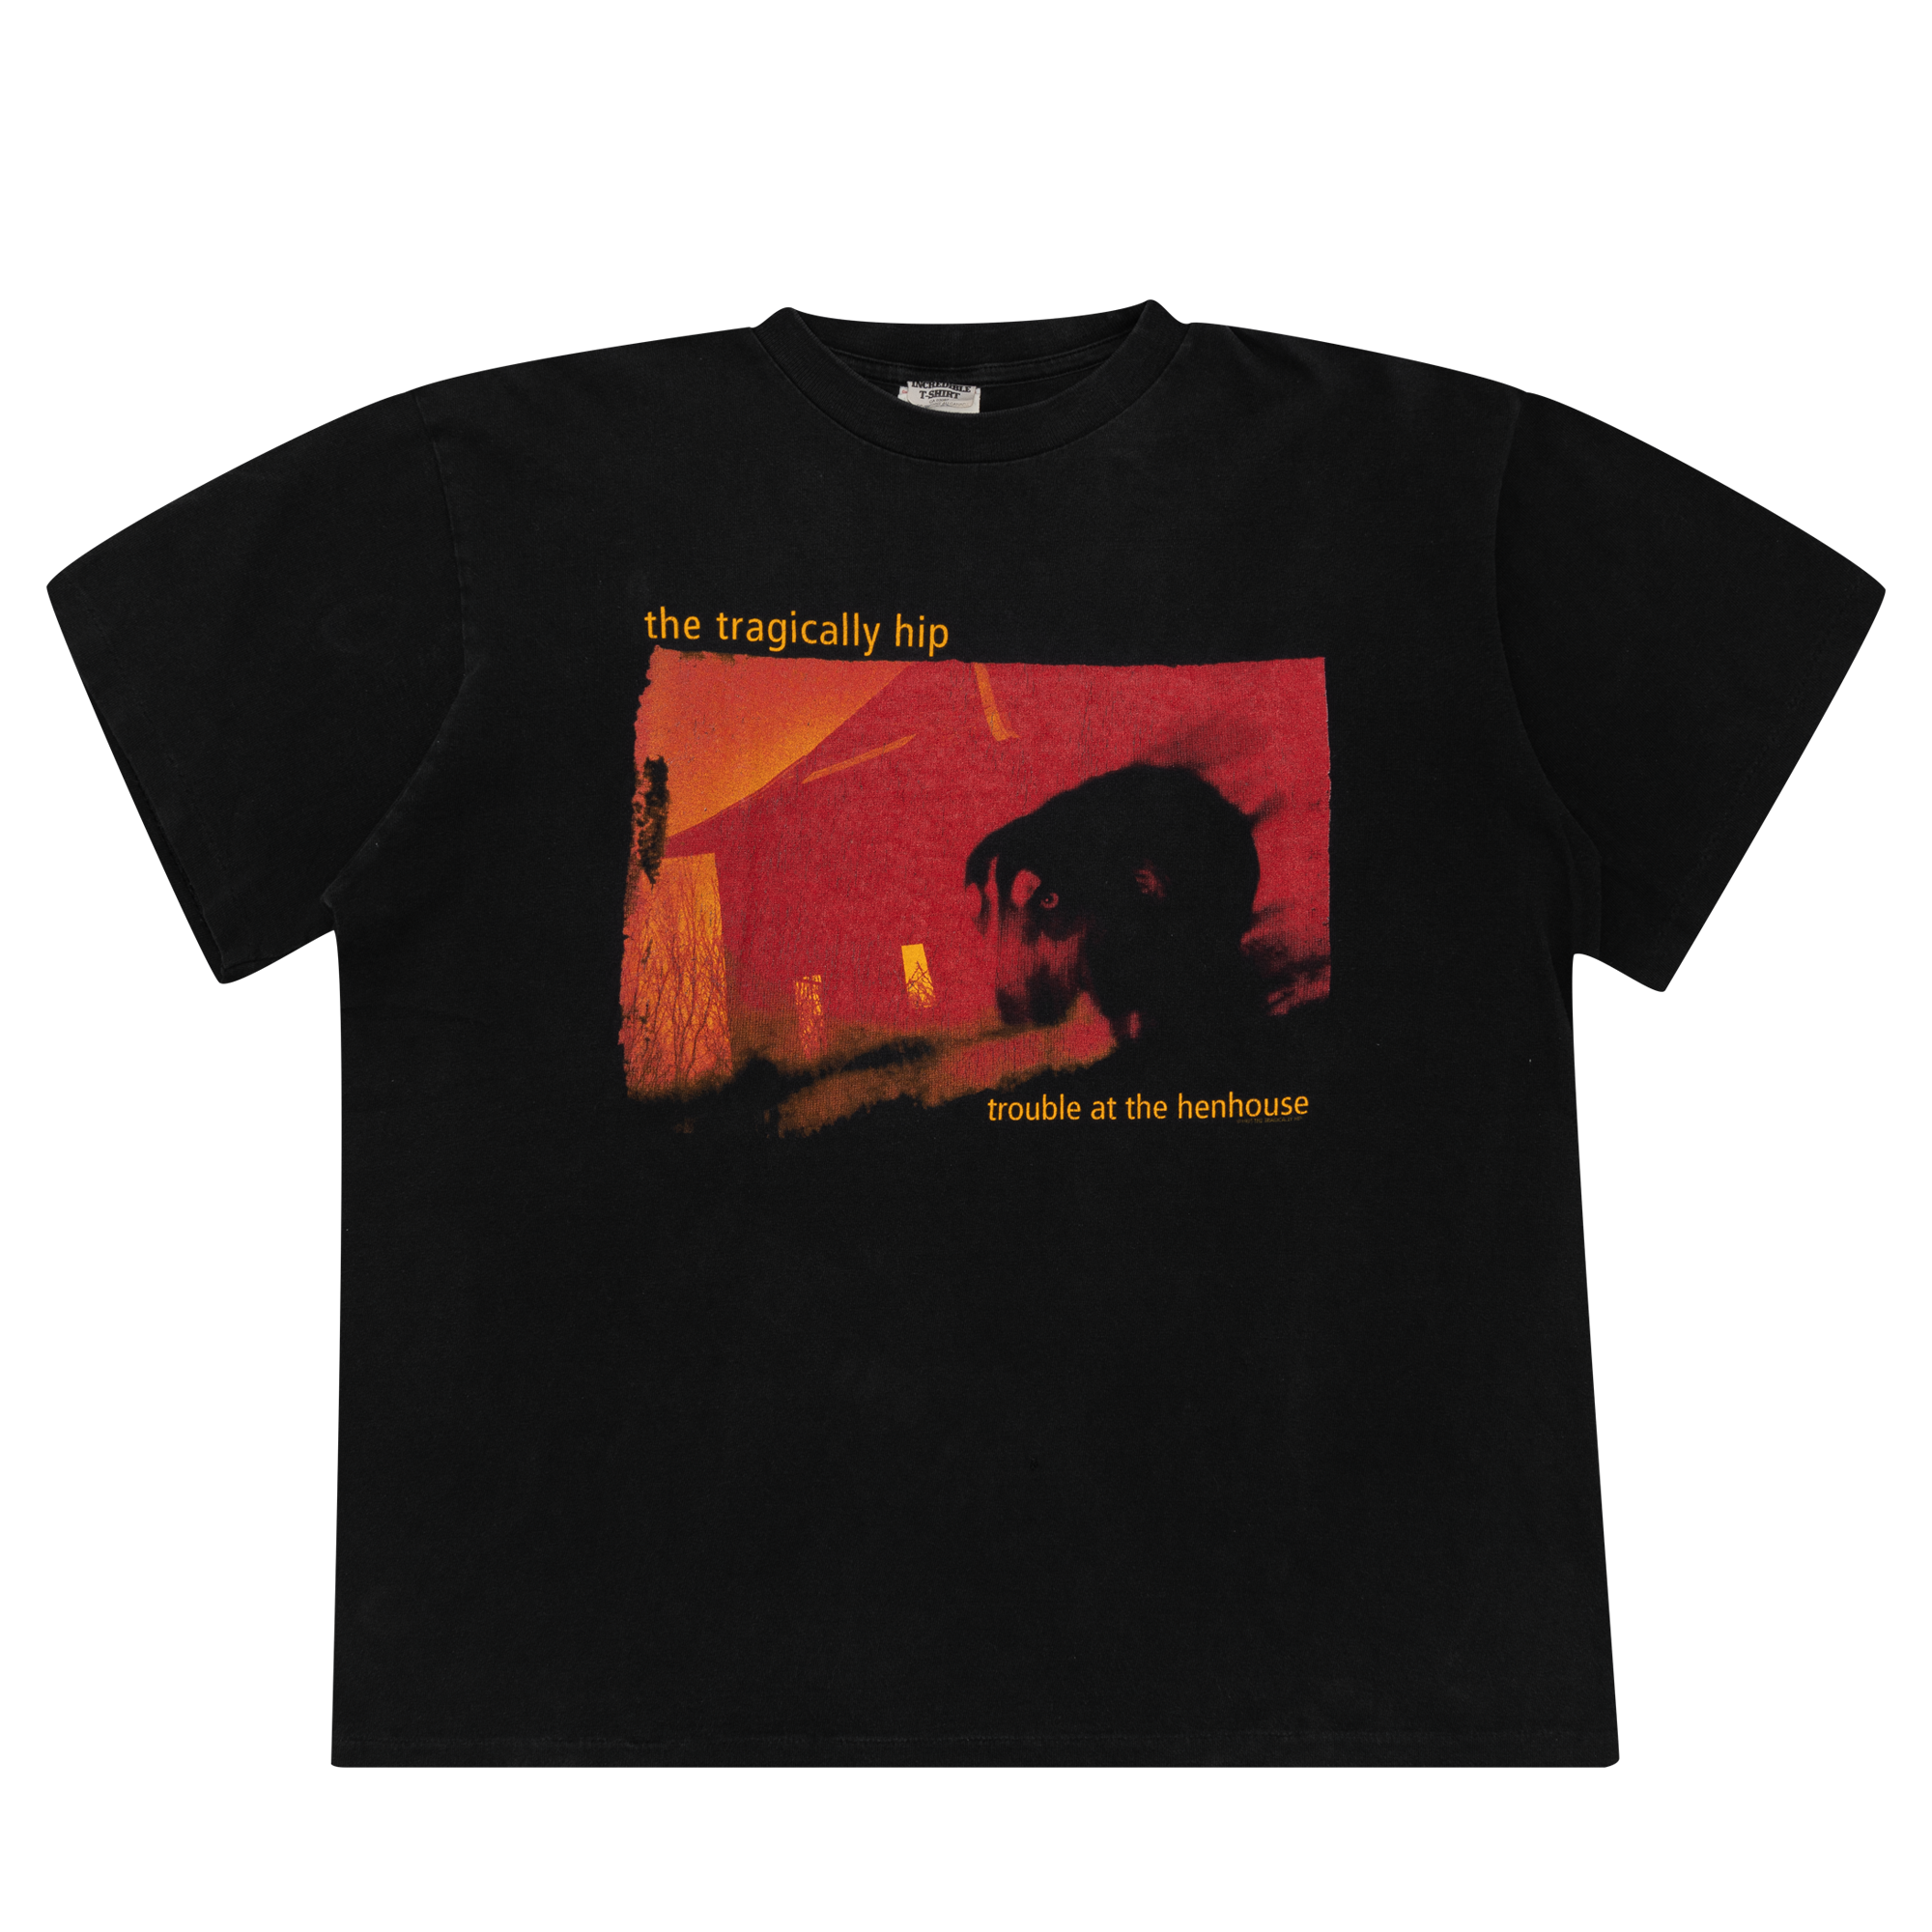 The Tragically Hip "Trouble at the Henhouse" 1996 Tee Black-PLUS